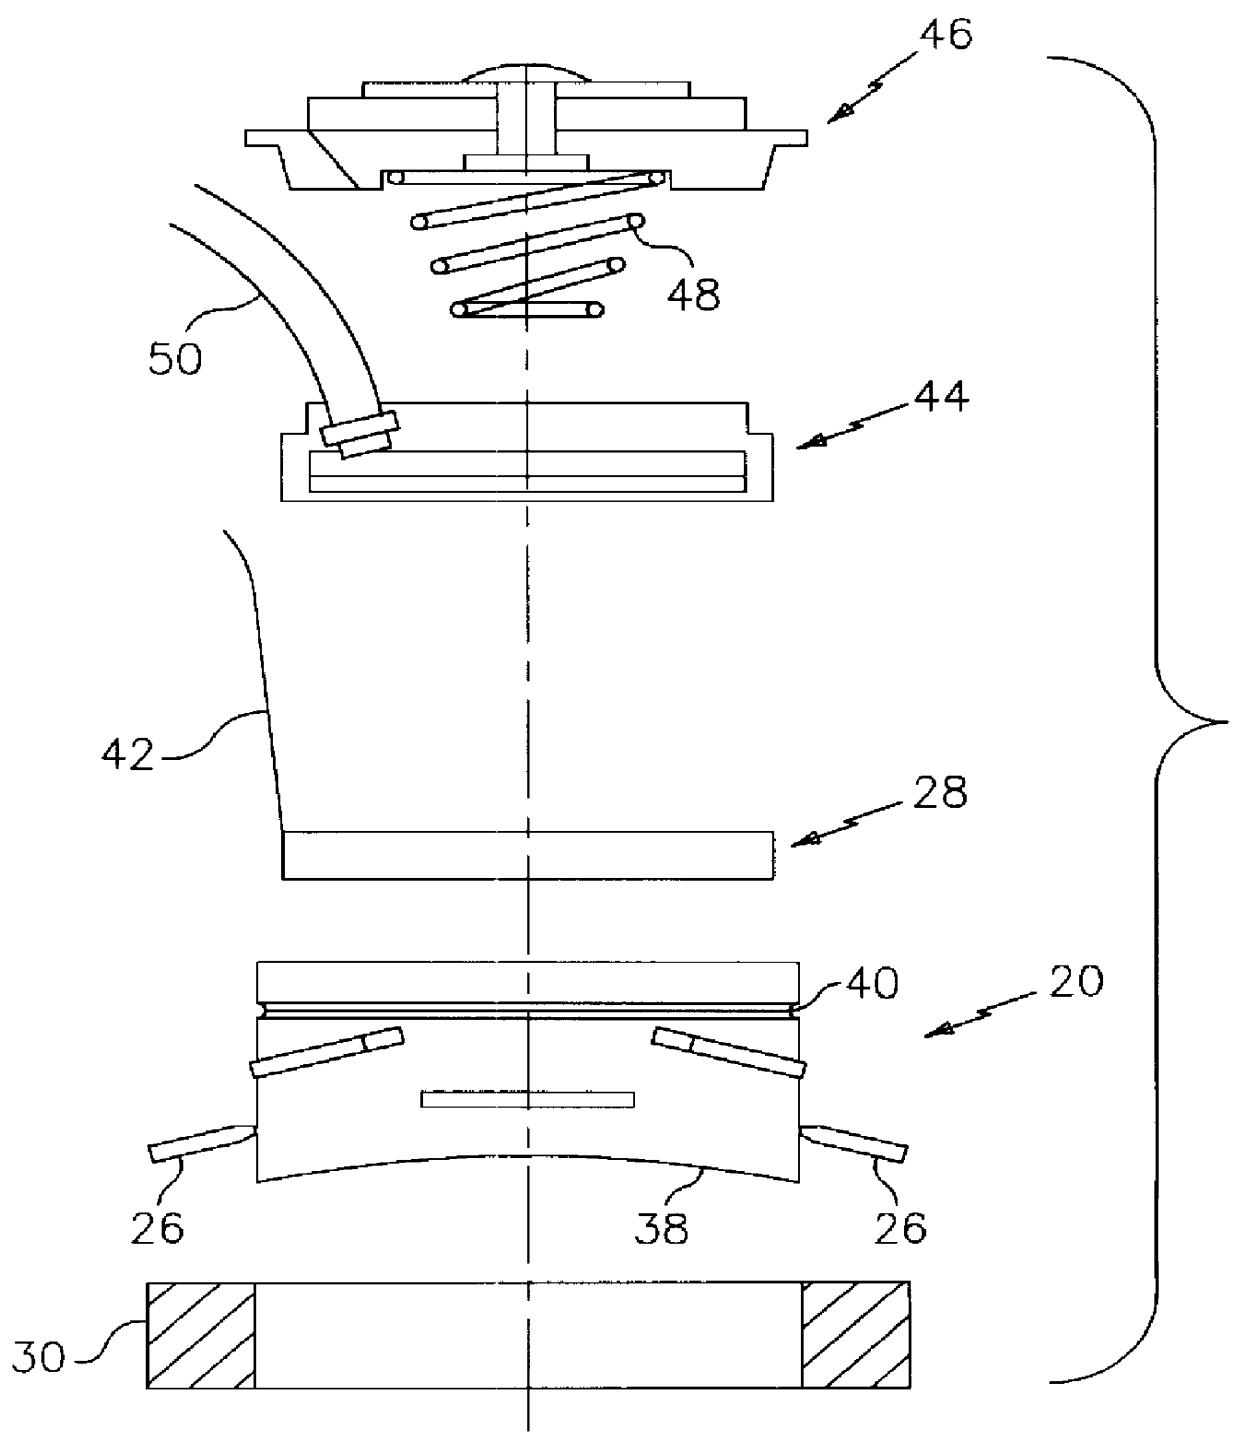 Apparatus and method for mounting an ultrasound transducer